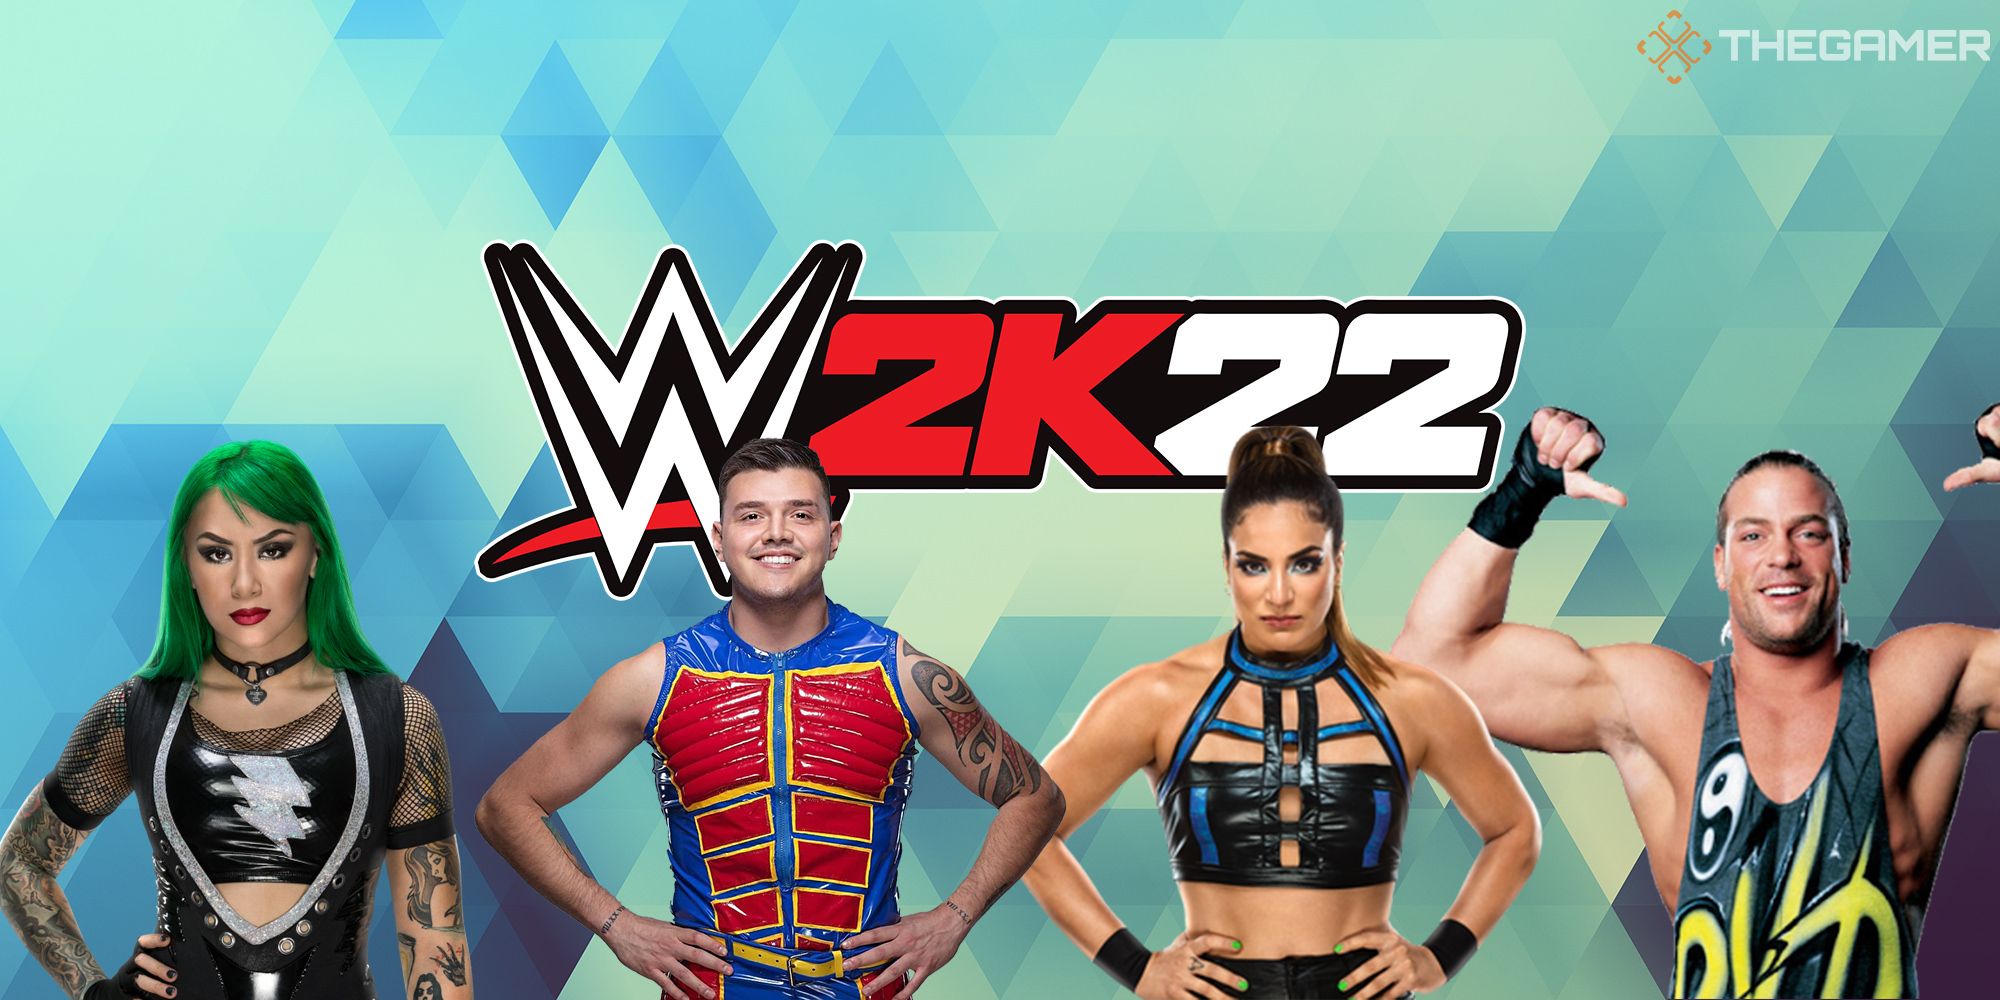 will there be a wwe 2k22